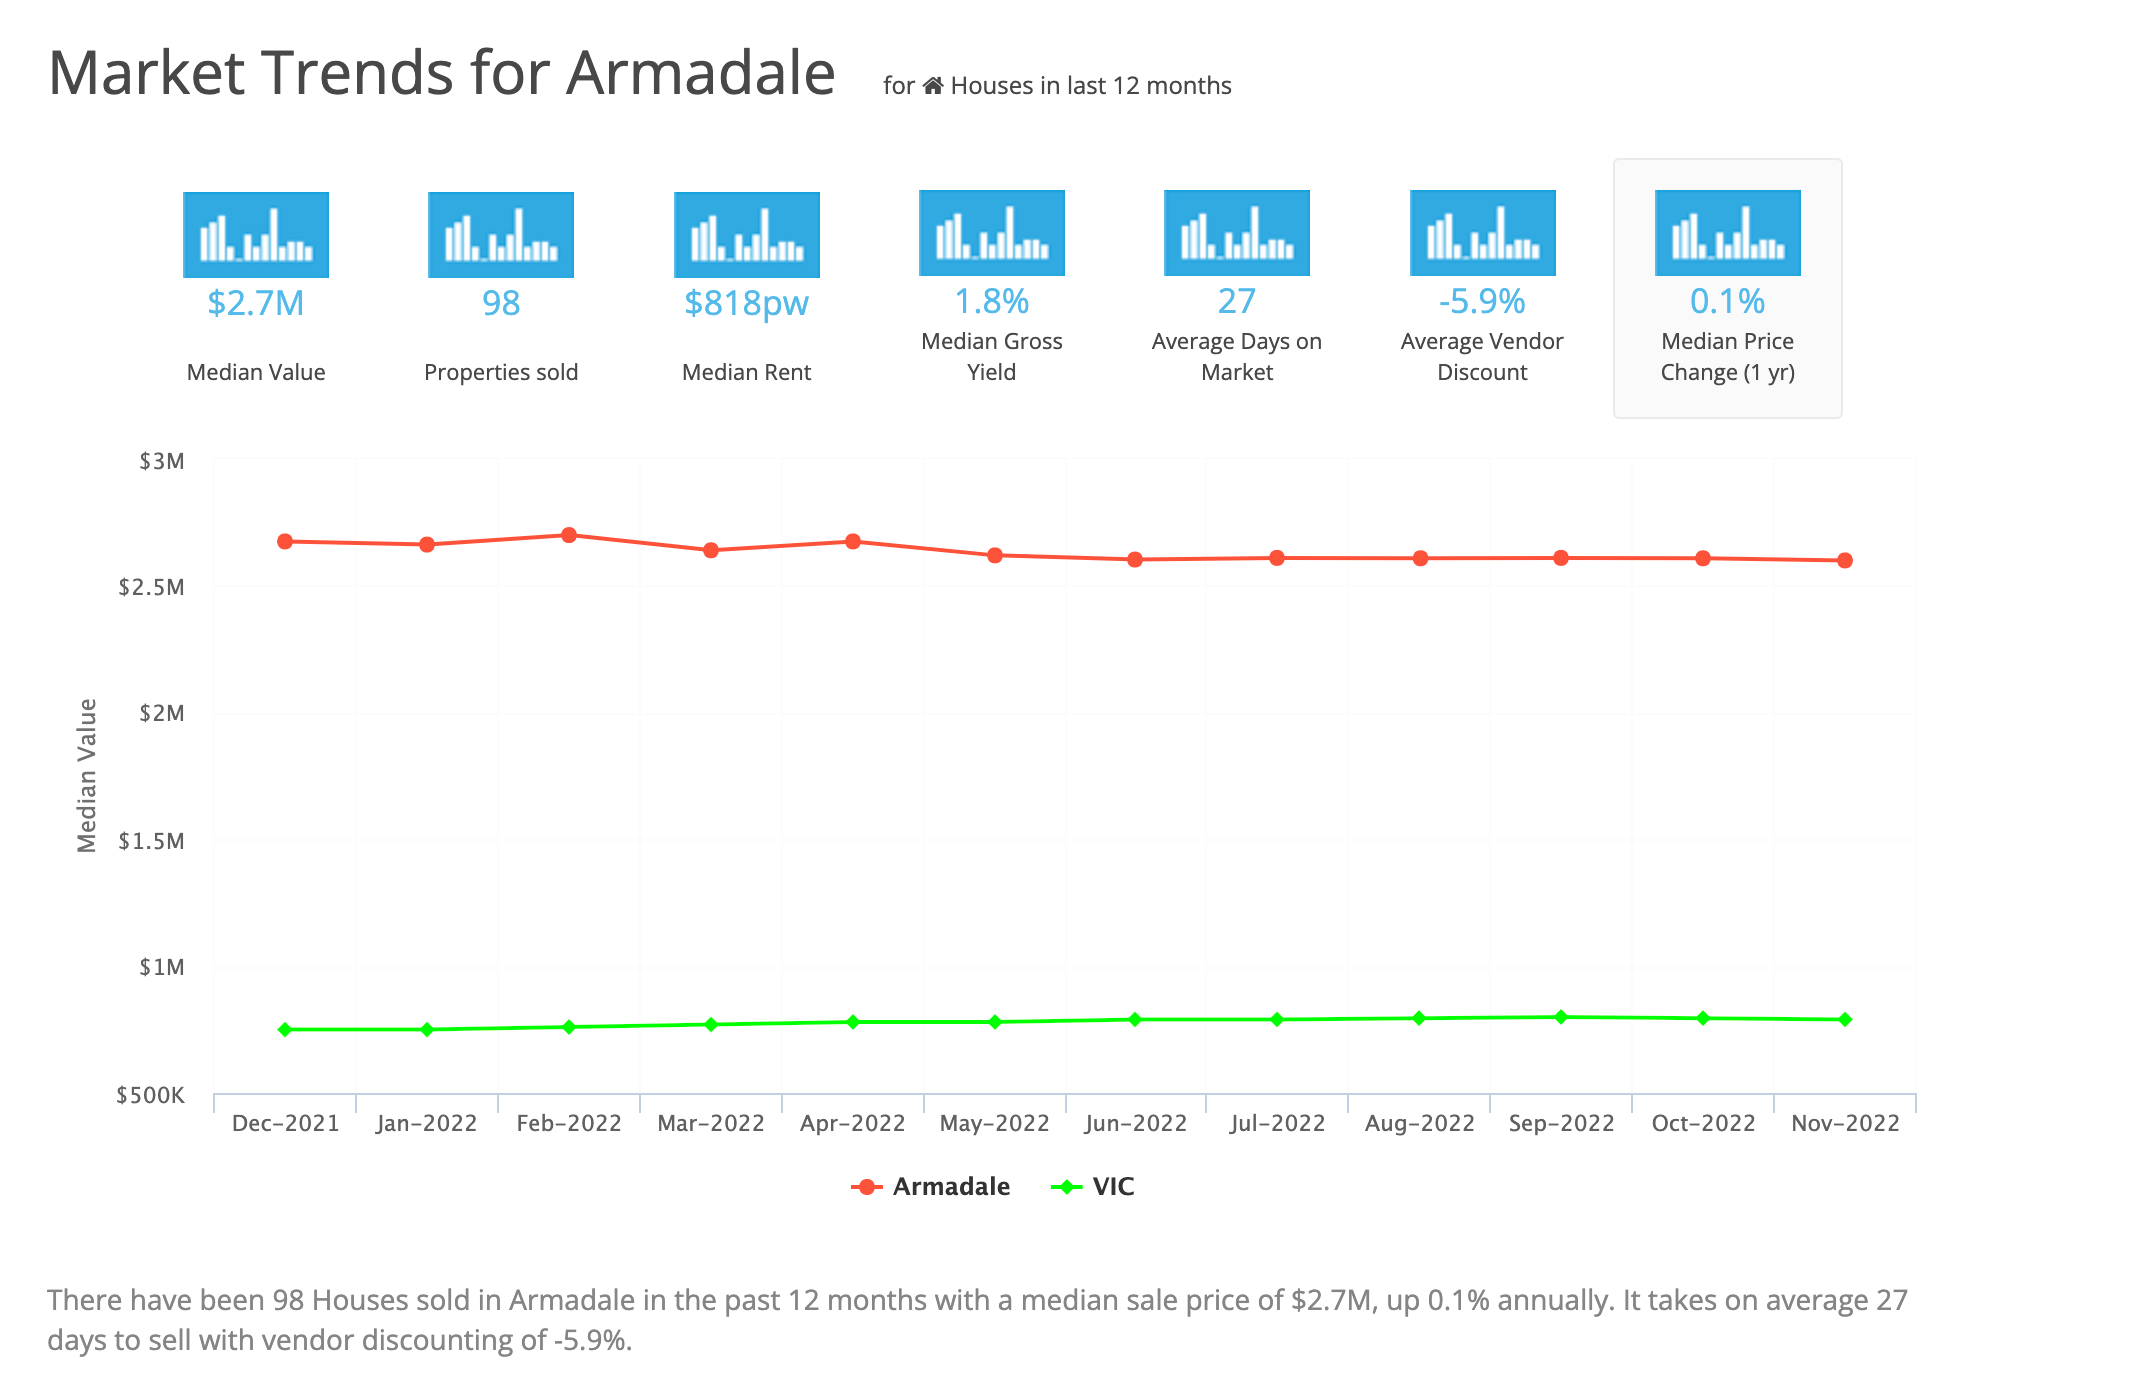 Market Trends for Armadale March 2023